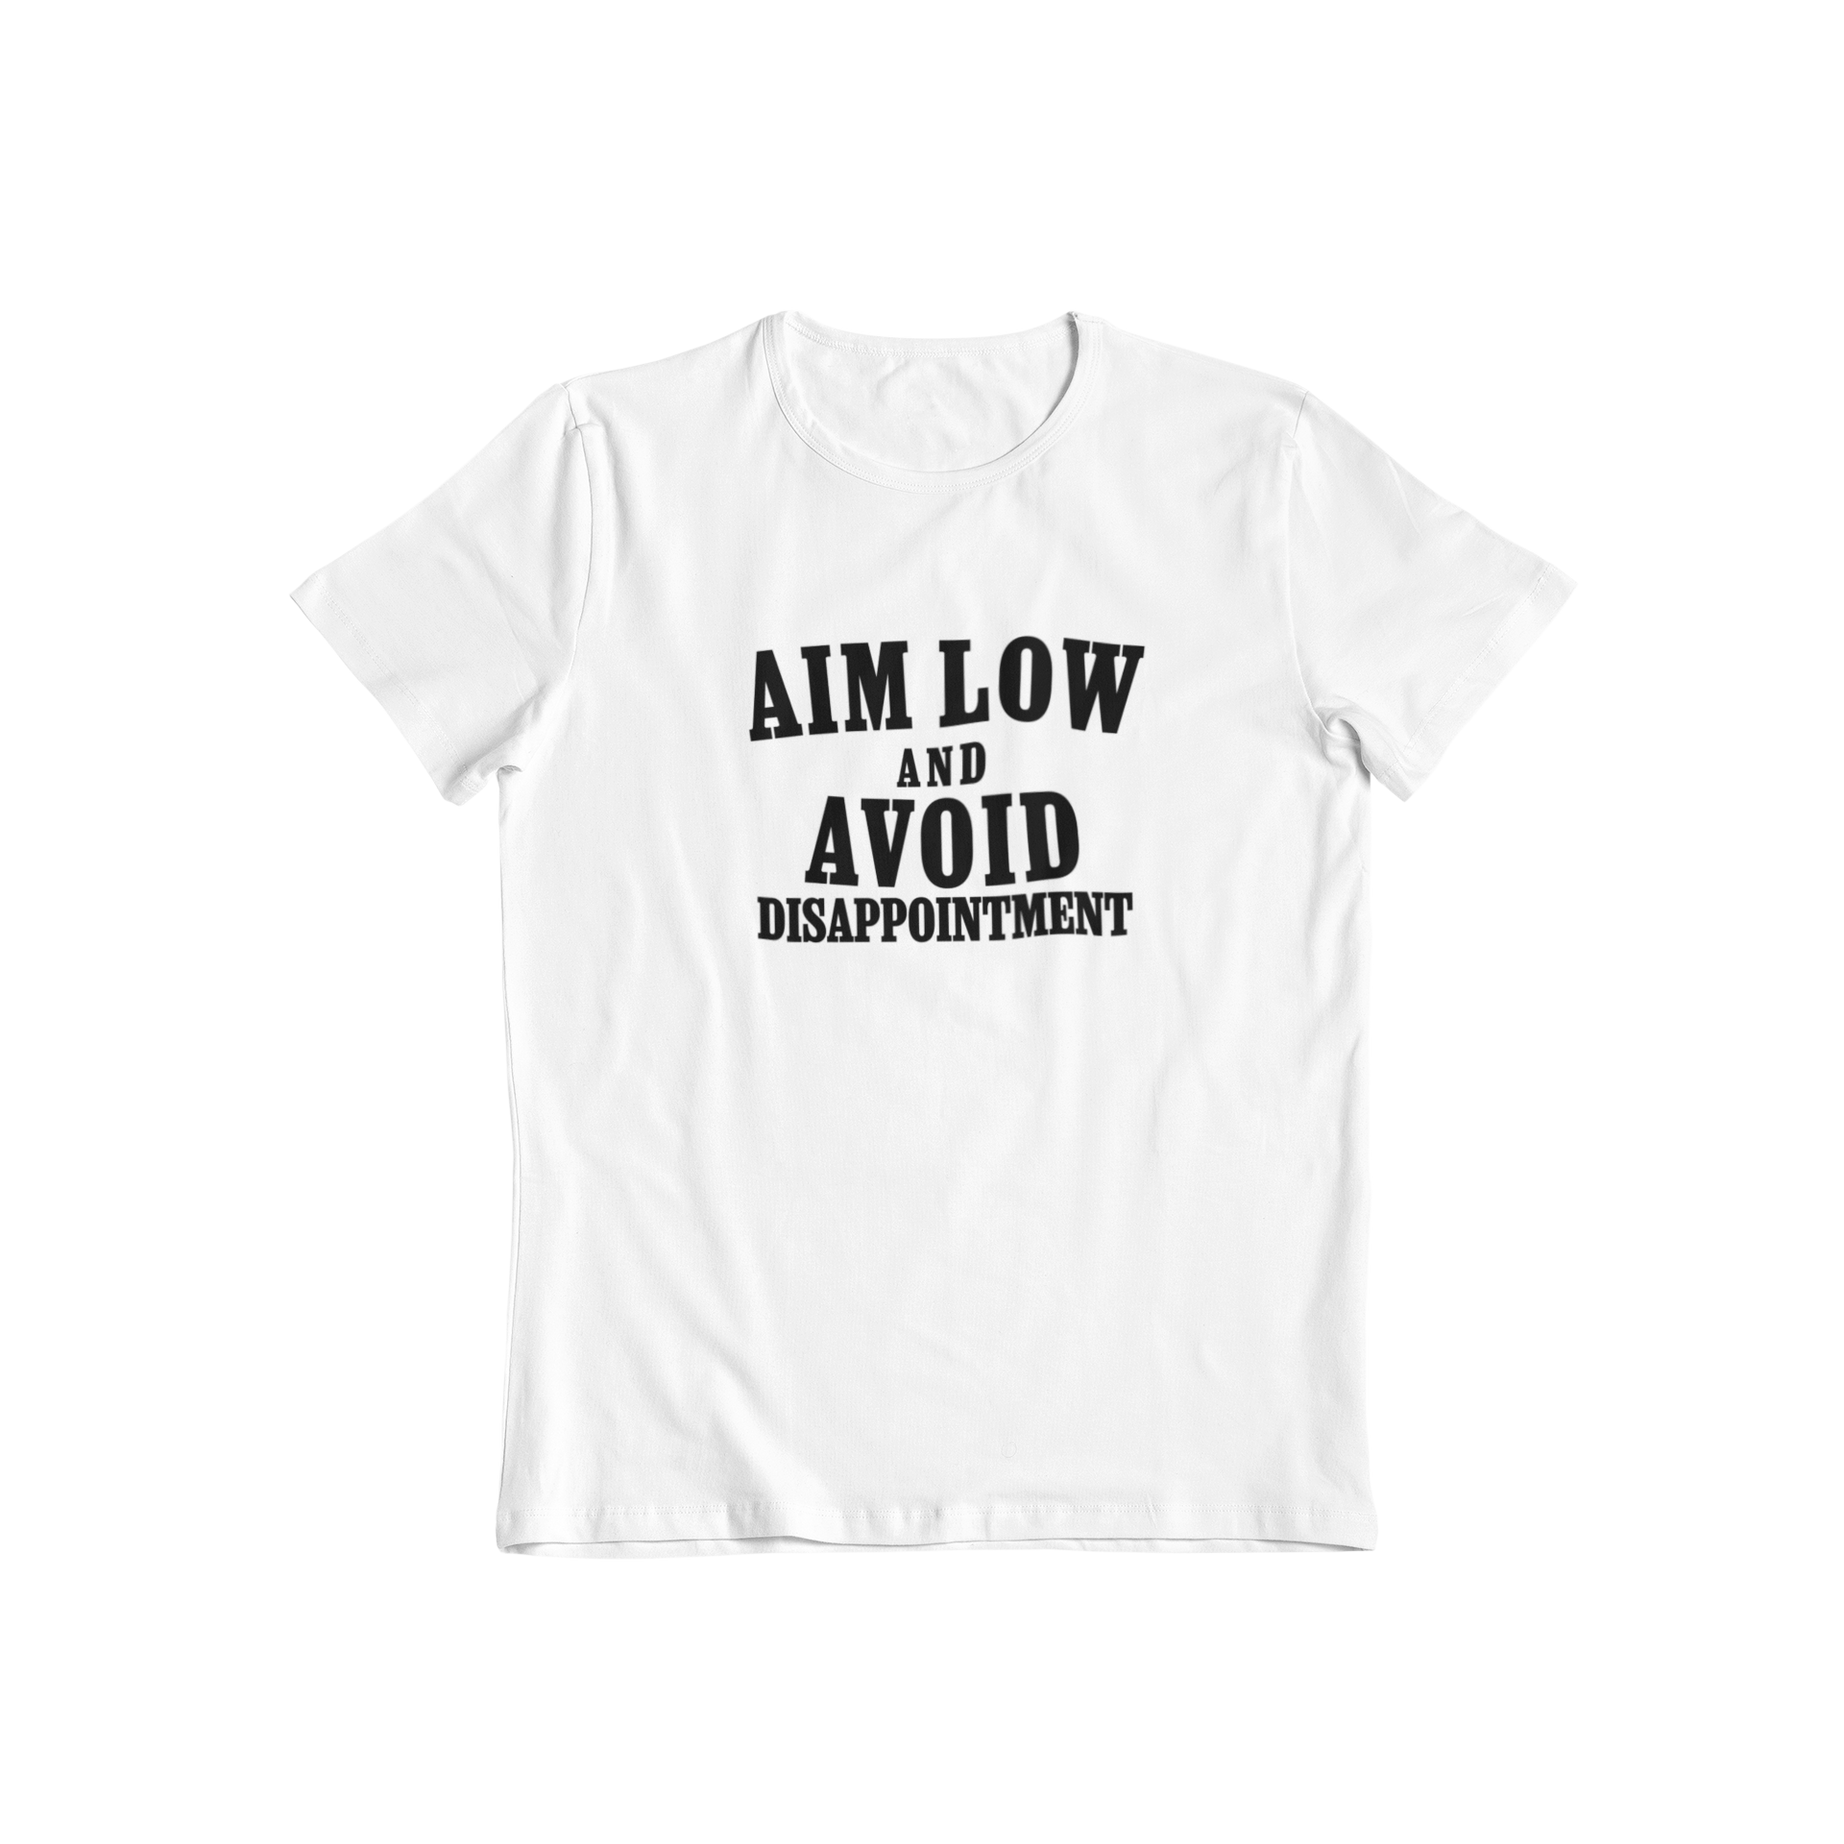 Make a bold statement with our Aim Low T-shirt. With our slogan, "Aim low and avoid disappointment," you'll be sure to keep your expectations in check. Crafted from high-quality material, this t-shirt is perfect for those who believe in setting realistic goals. Stay grounded and stylish with our Aim Low T-shirt.